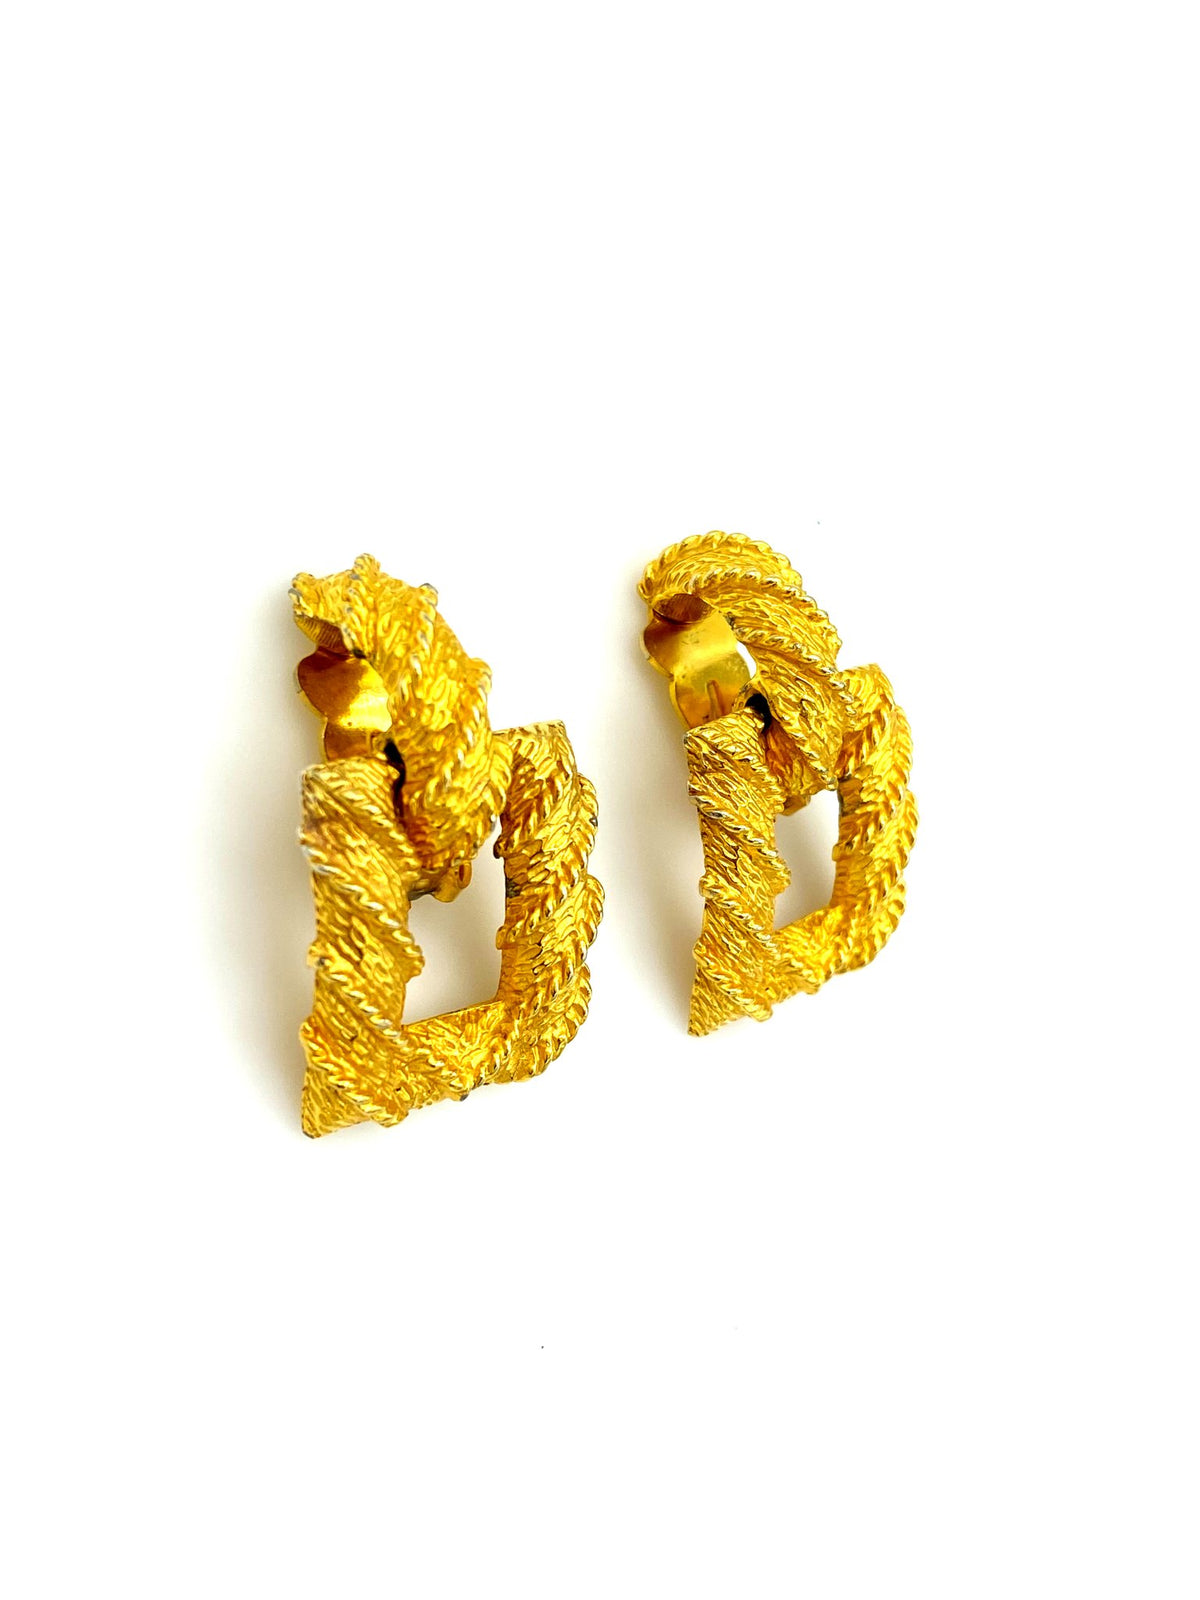 Kenneth Jay Lane Gold Wrapped Door Knocker Vintage Clip-On Earrings - 24 Wishes Vintage Jewelry